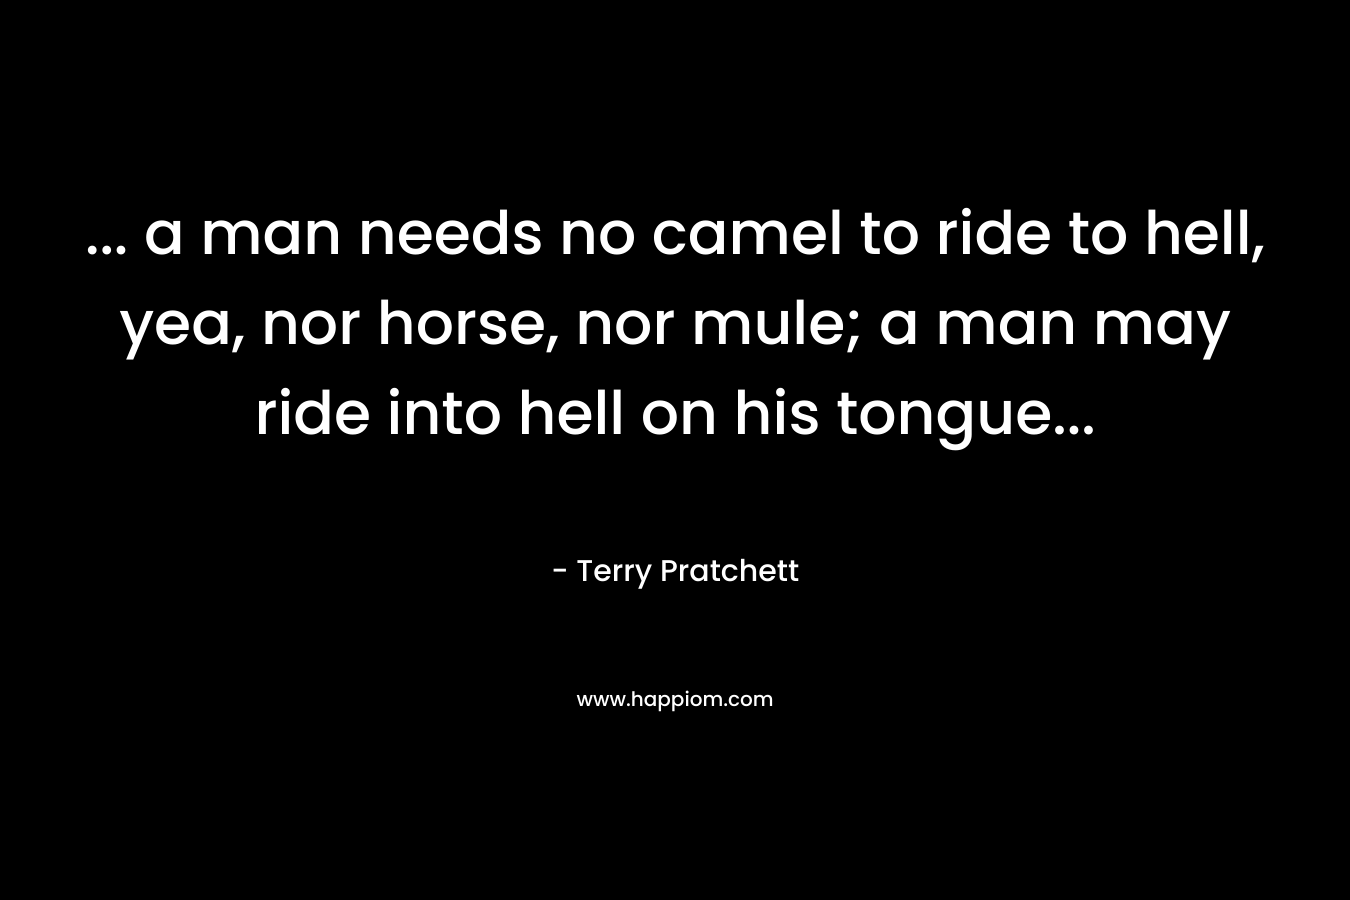 ... a man needs no camel to ride to hell, yea, nor horse, nor mule; a man may ride into hell on his tongue...